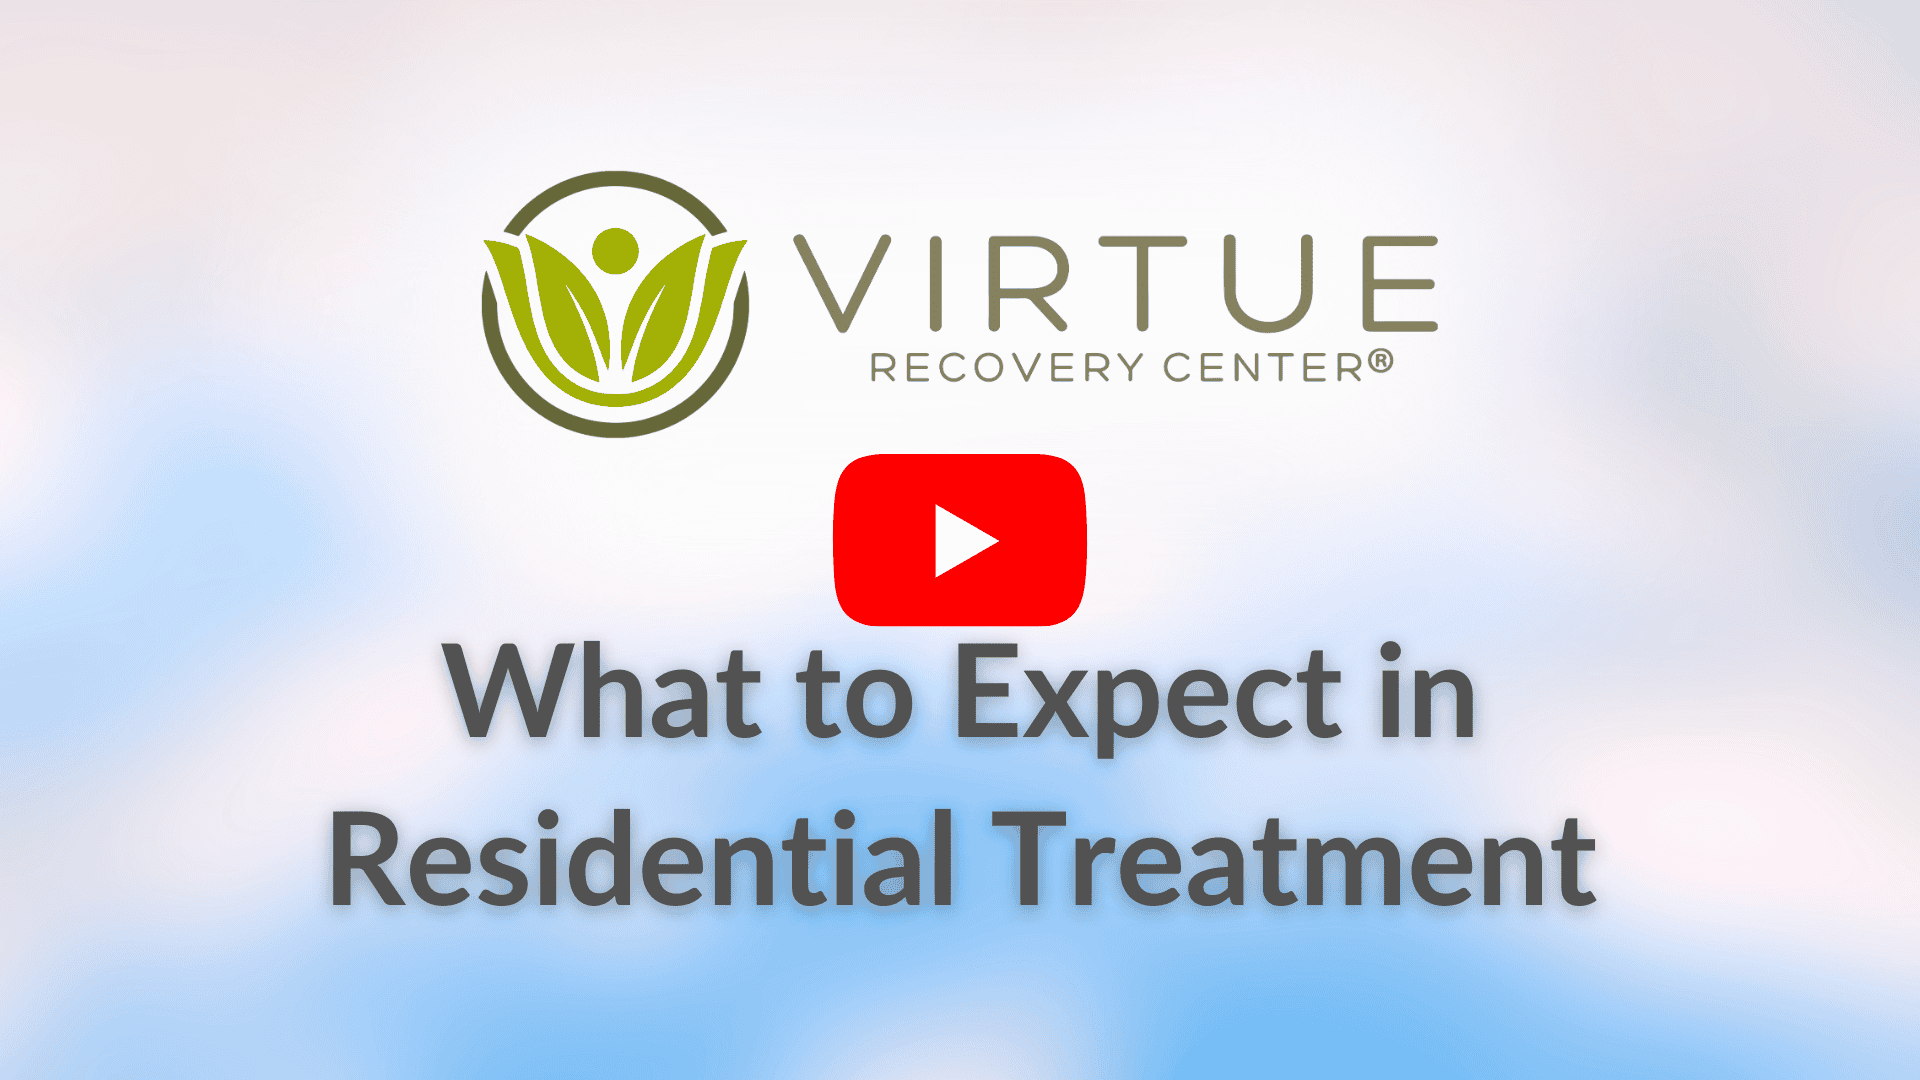   What to Expect in Residential Treatment Video Thumbnail